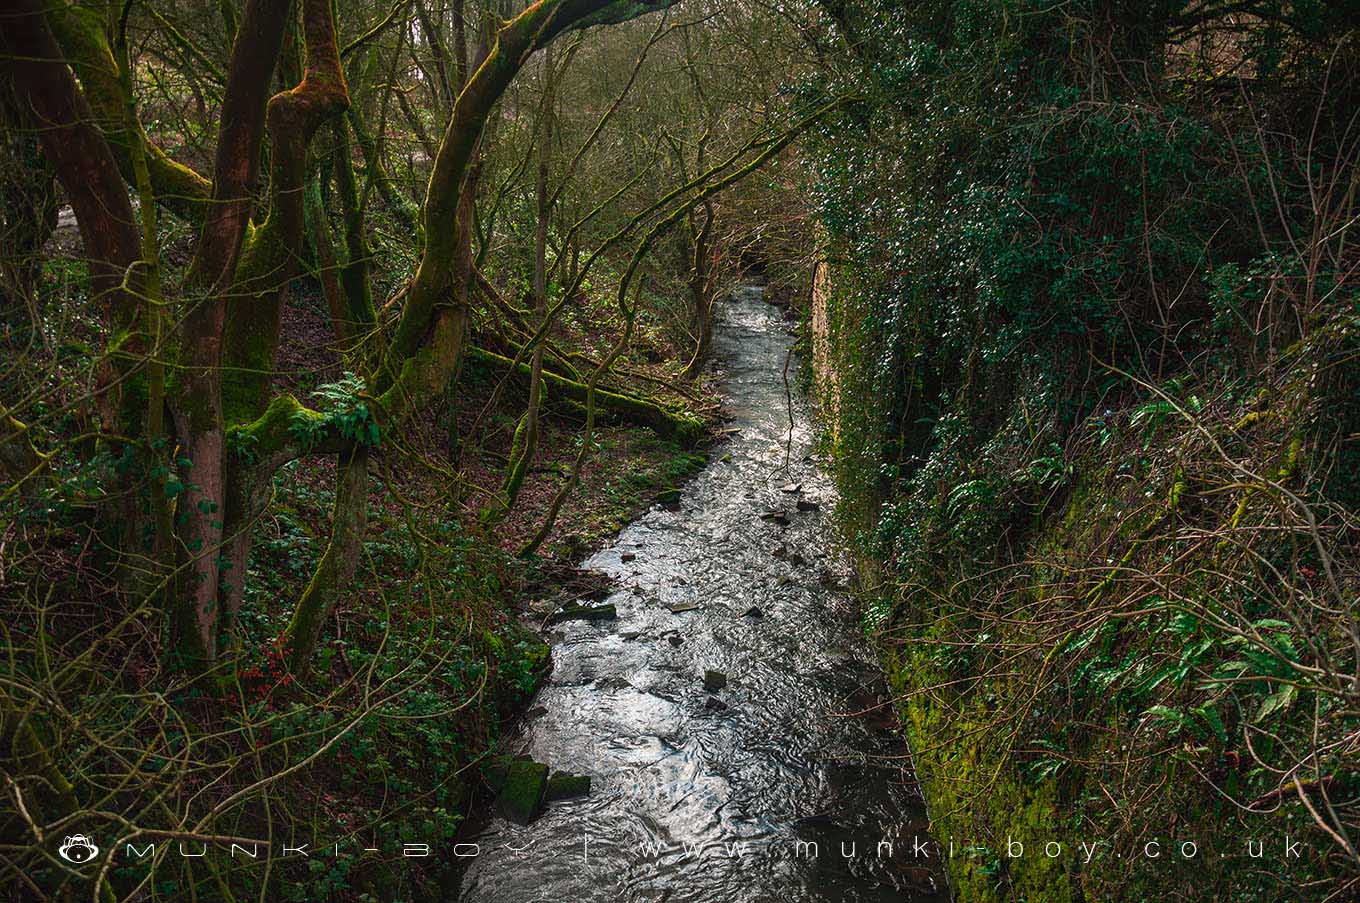 Rivers and Streams in Westhoughton